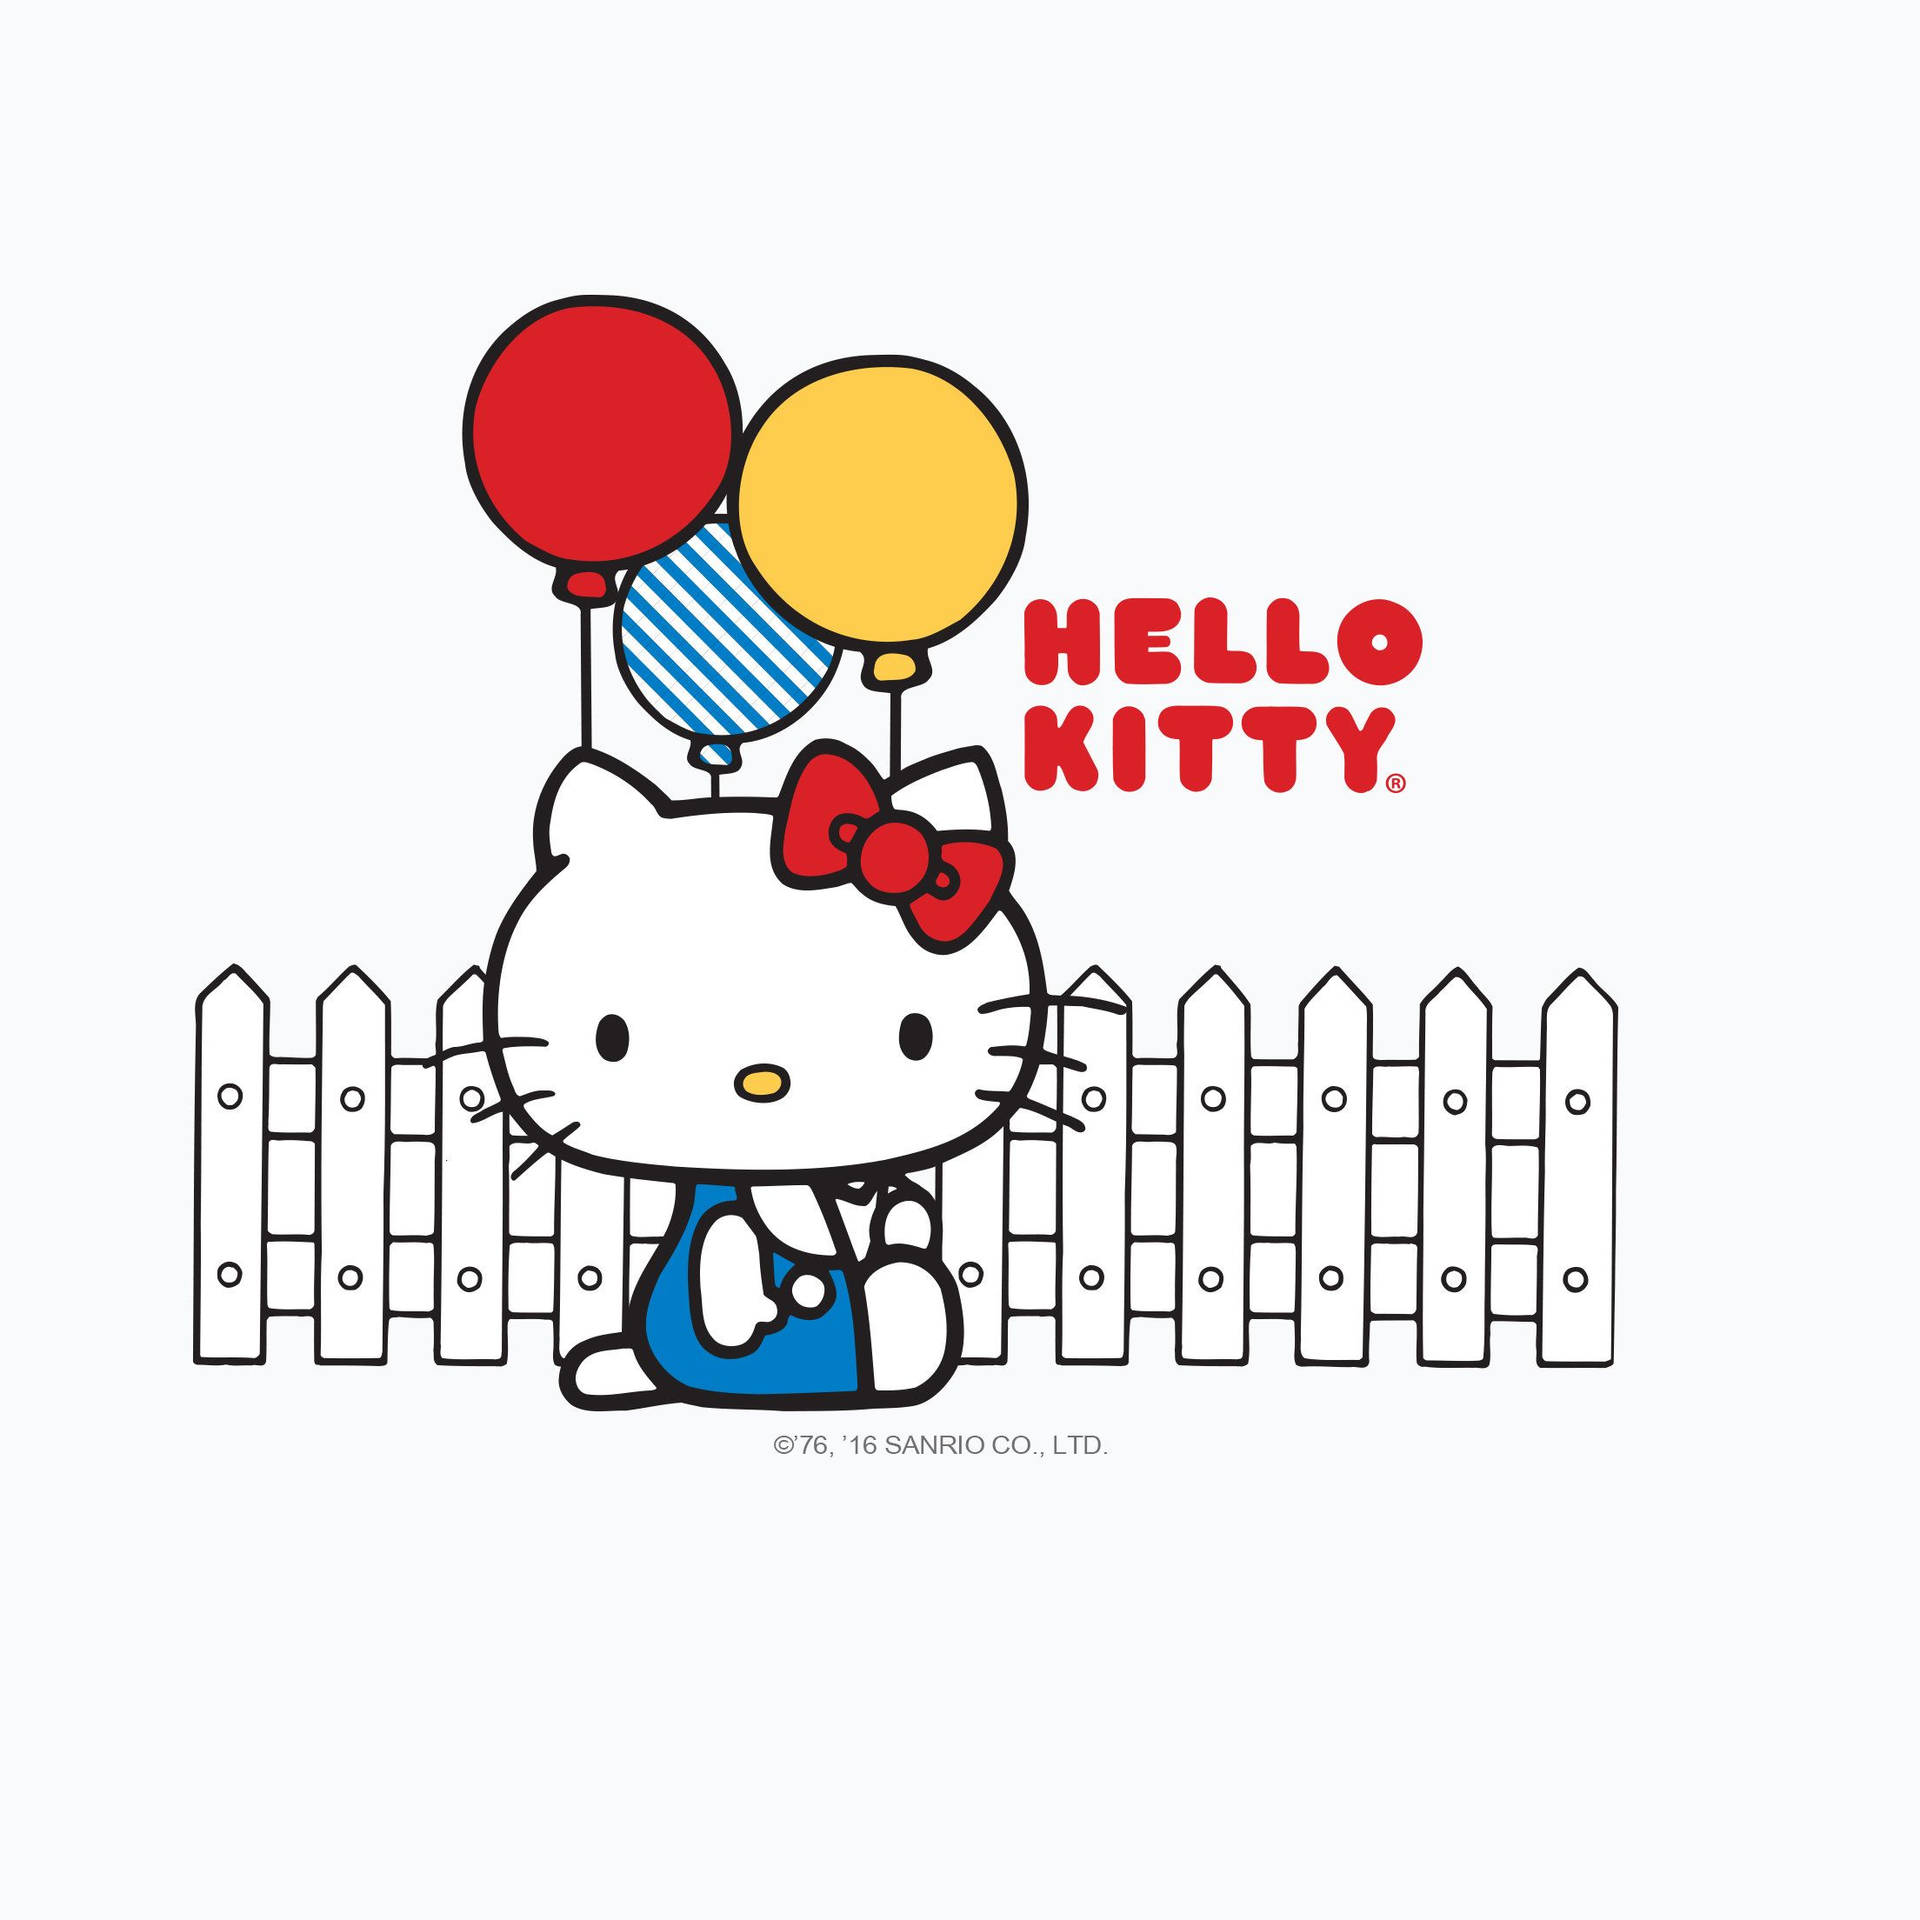 Hello Kitty And Balloons - Happiness In The Air Background